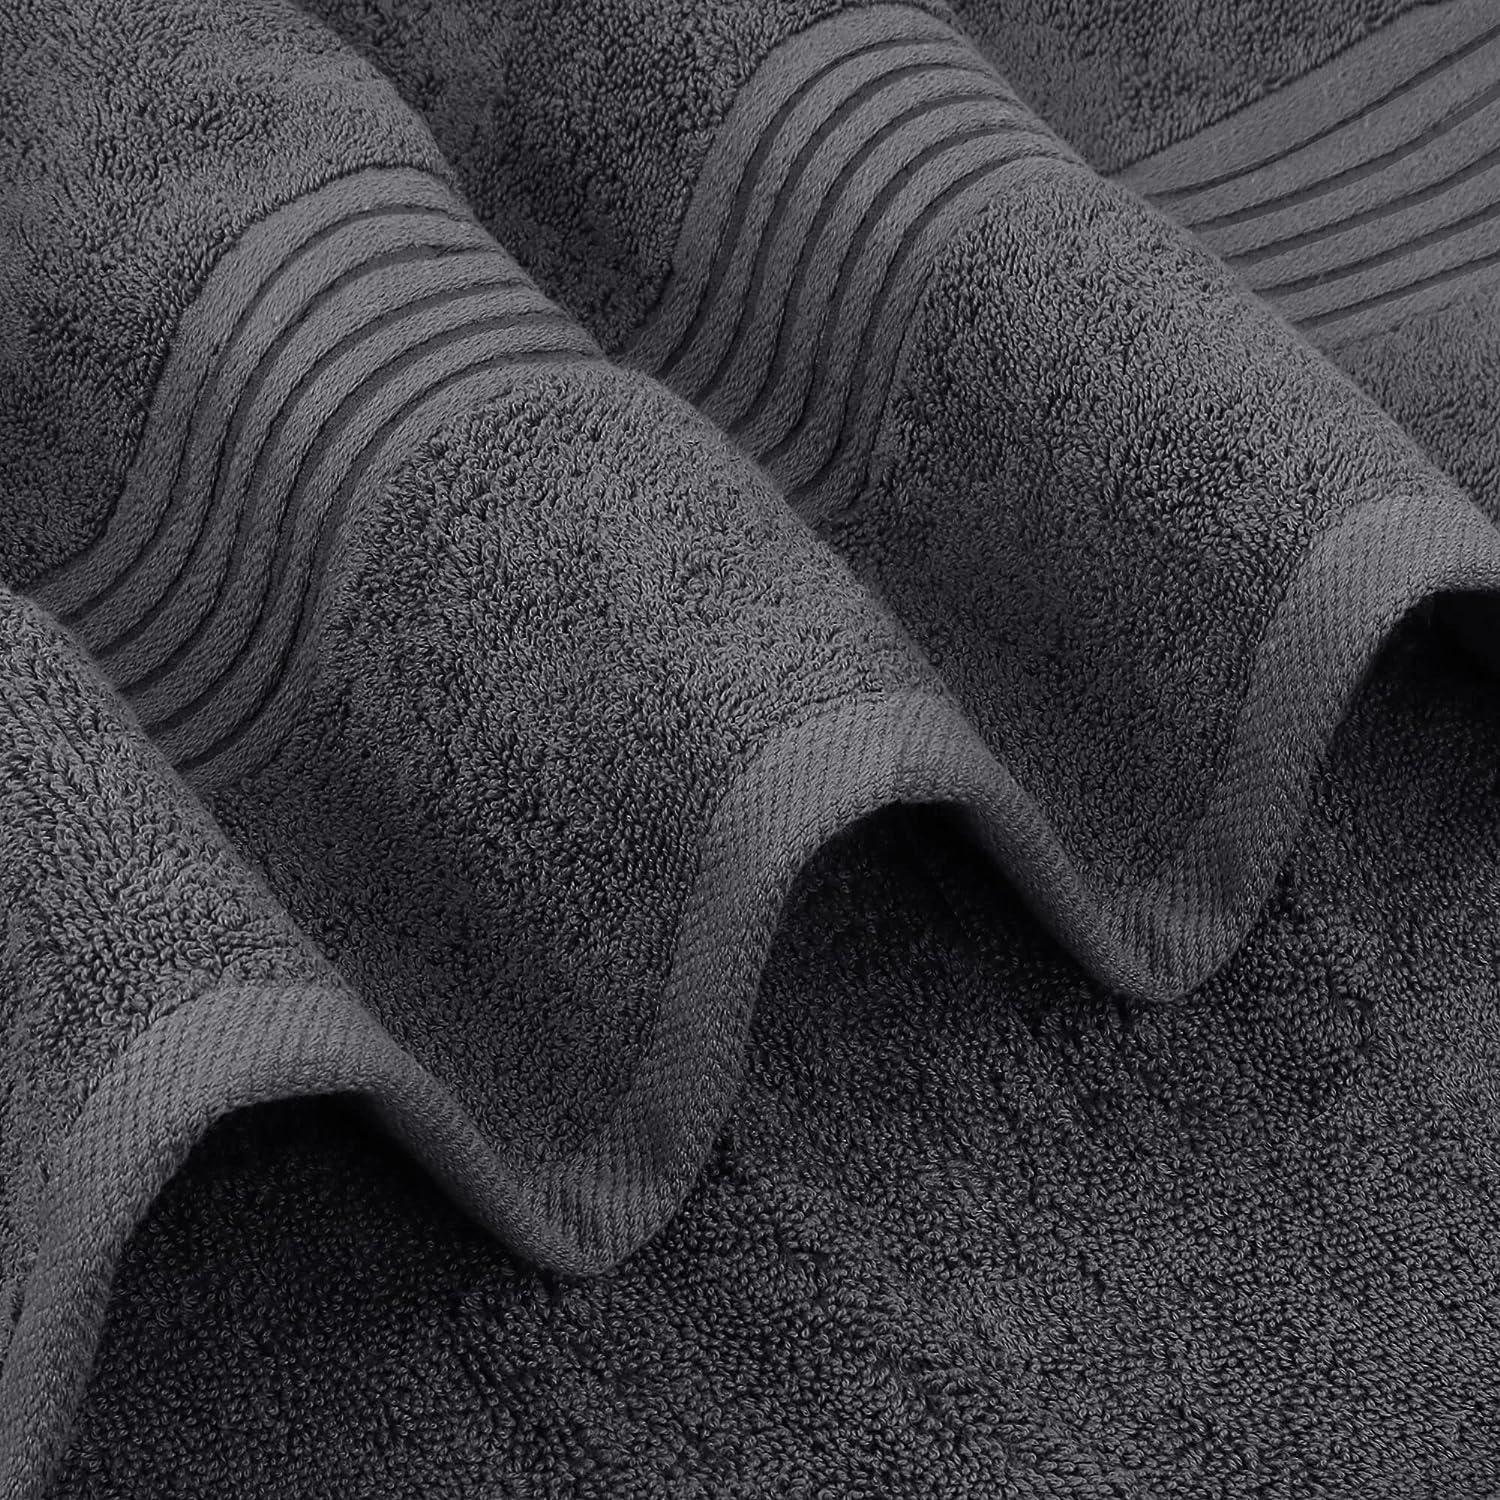 Utopia Towels - Bath Towels Set, Grey - Premium 600 GSM 100% Ring Spun  Cotton - Quick Dry, Highly Absorbent, Soft Feel Towels, P